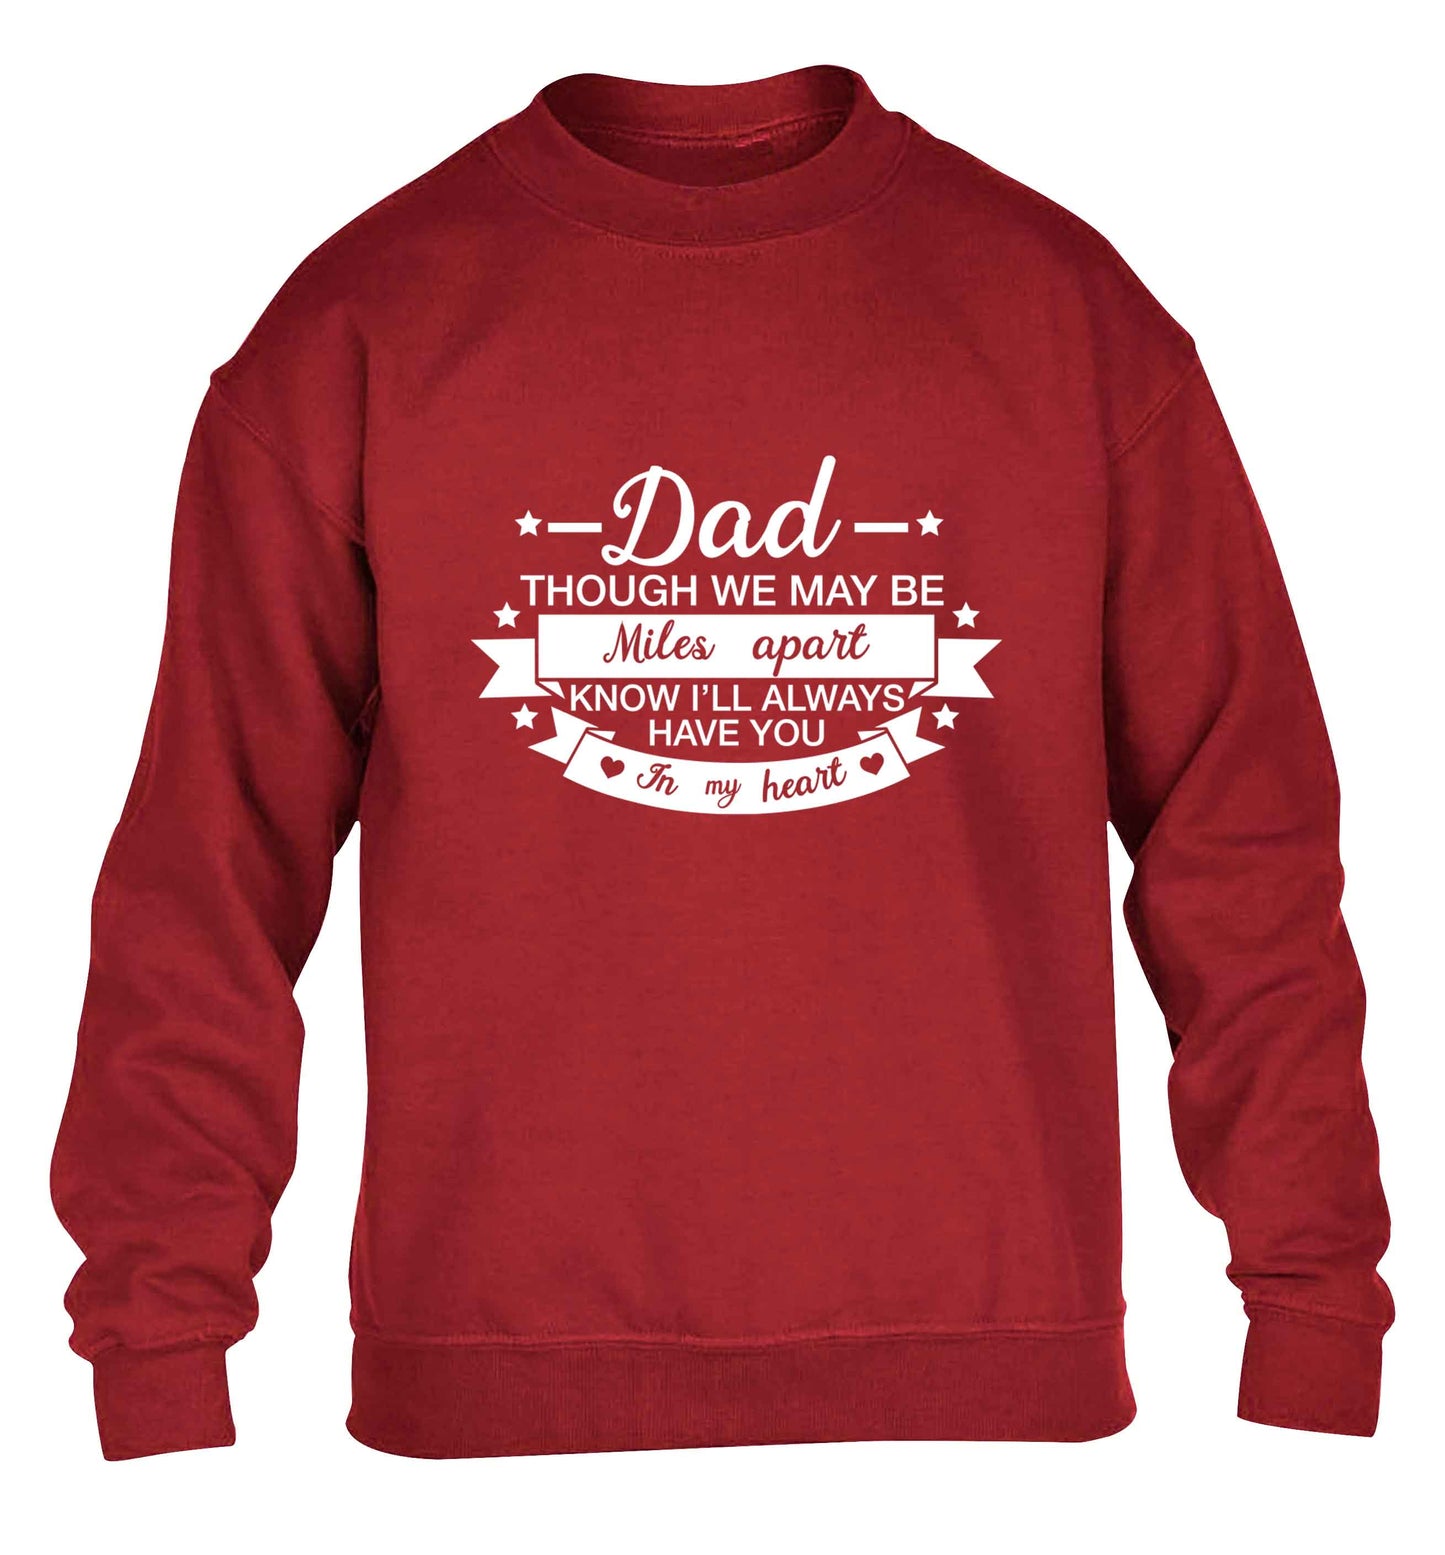 Dad though we are miles apart know I'll always have you in my heart children's grey sweater 12-13 Years